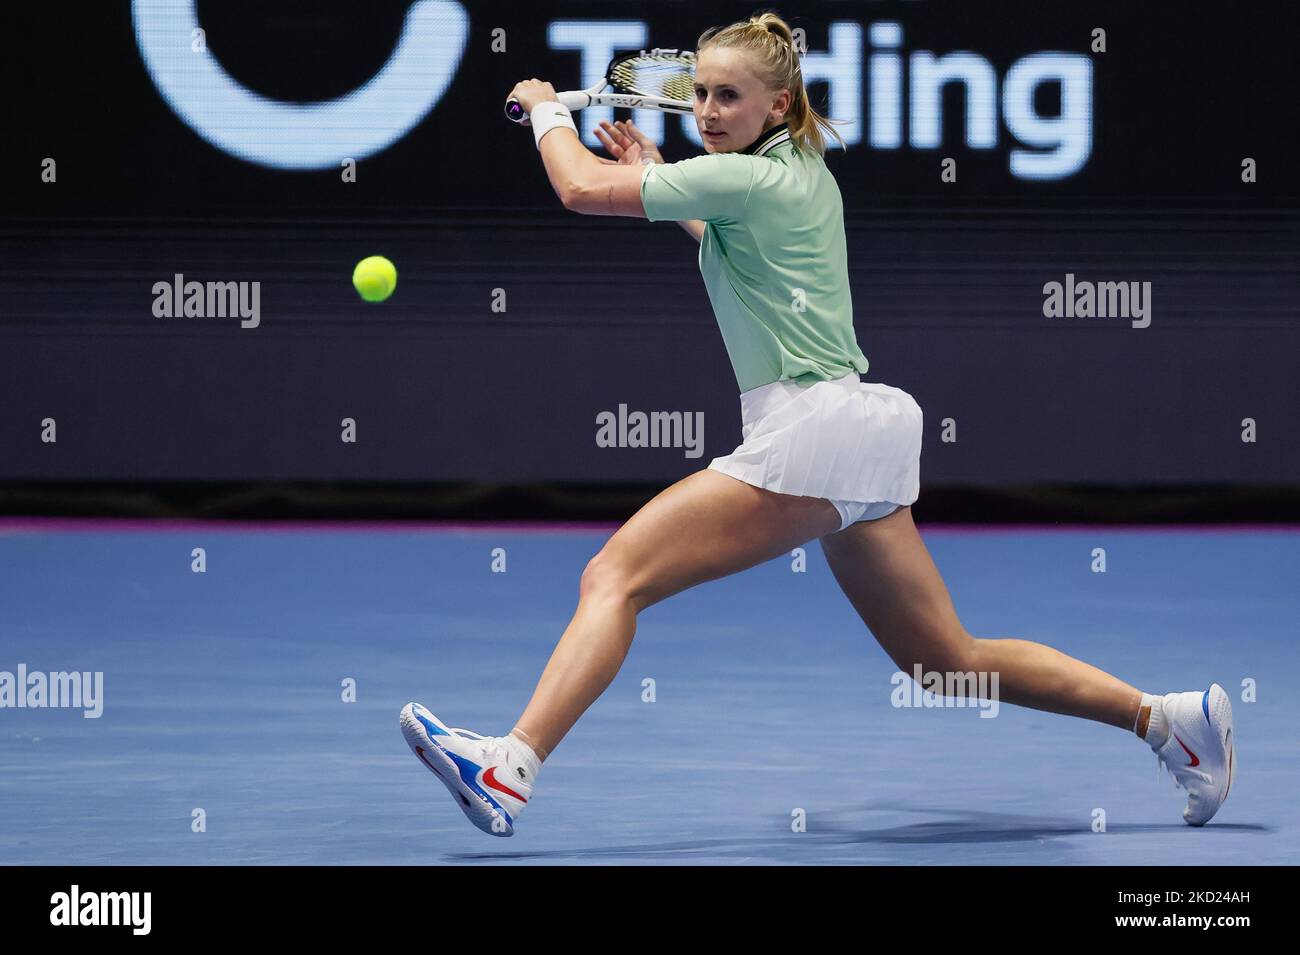 Jil Teichmann of Switzerland returns the ball to Anett Kontaveit of Estonia during the womens singles Round of 32 match of the WTA 500 St